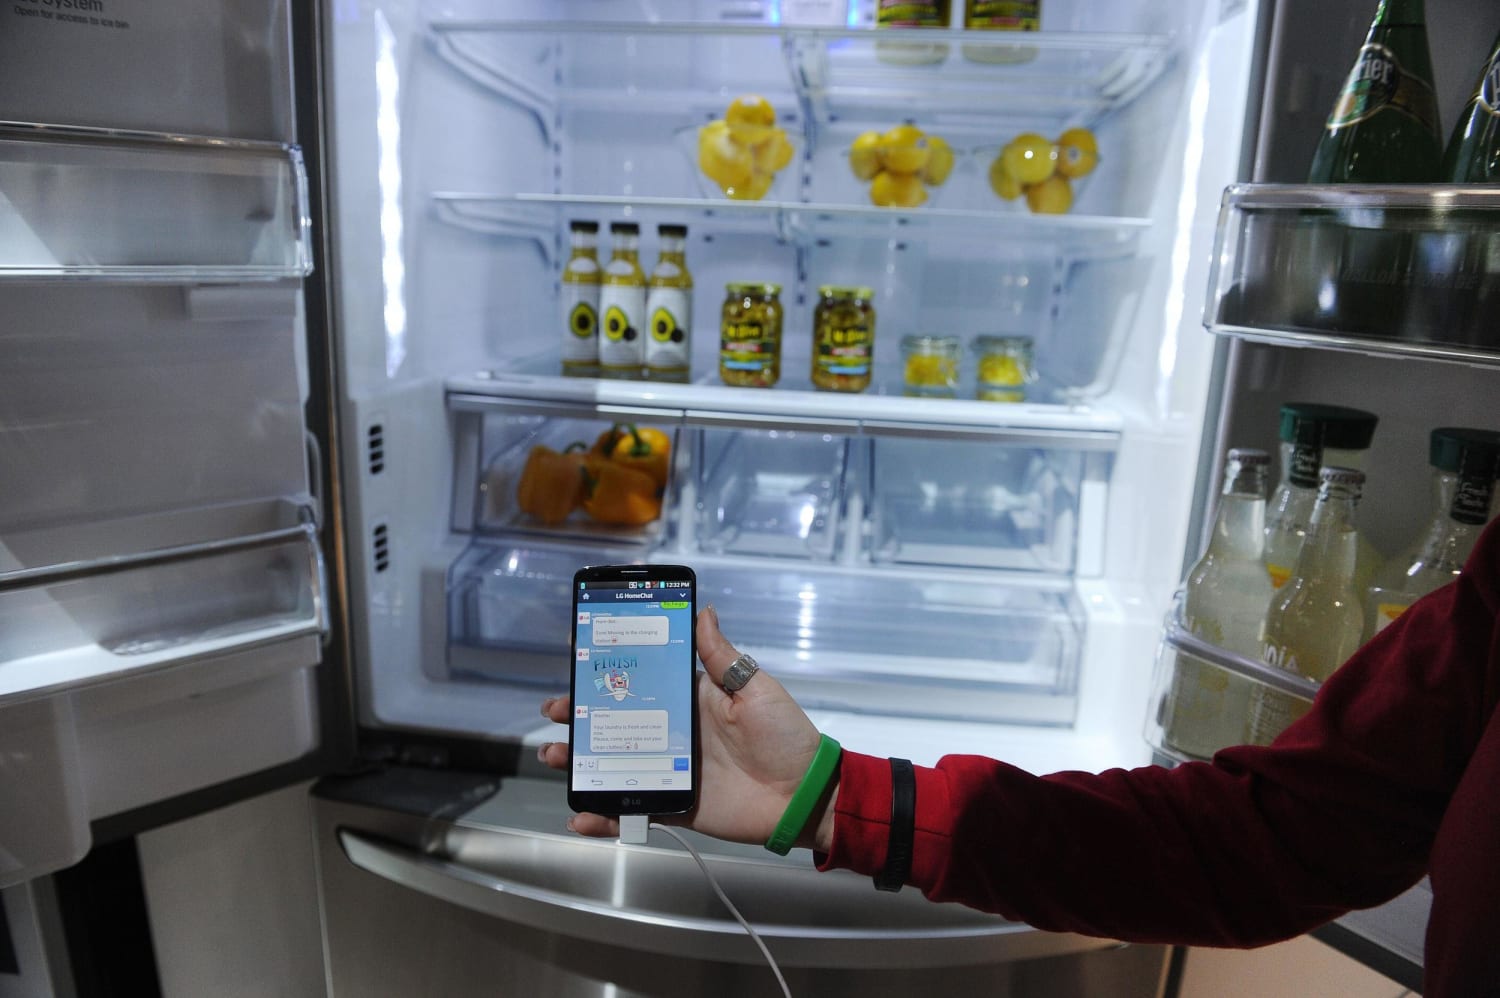 Smart Refrigerators Hacked to Send out Spam: Report